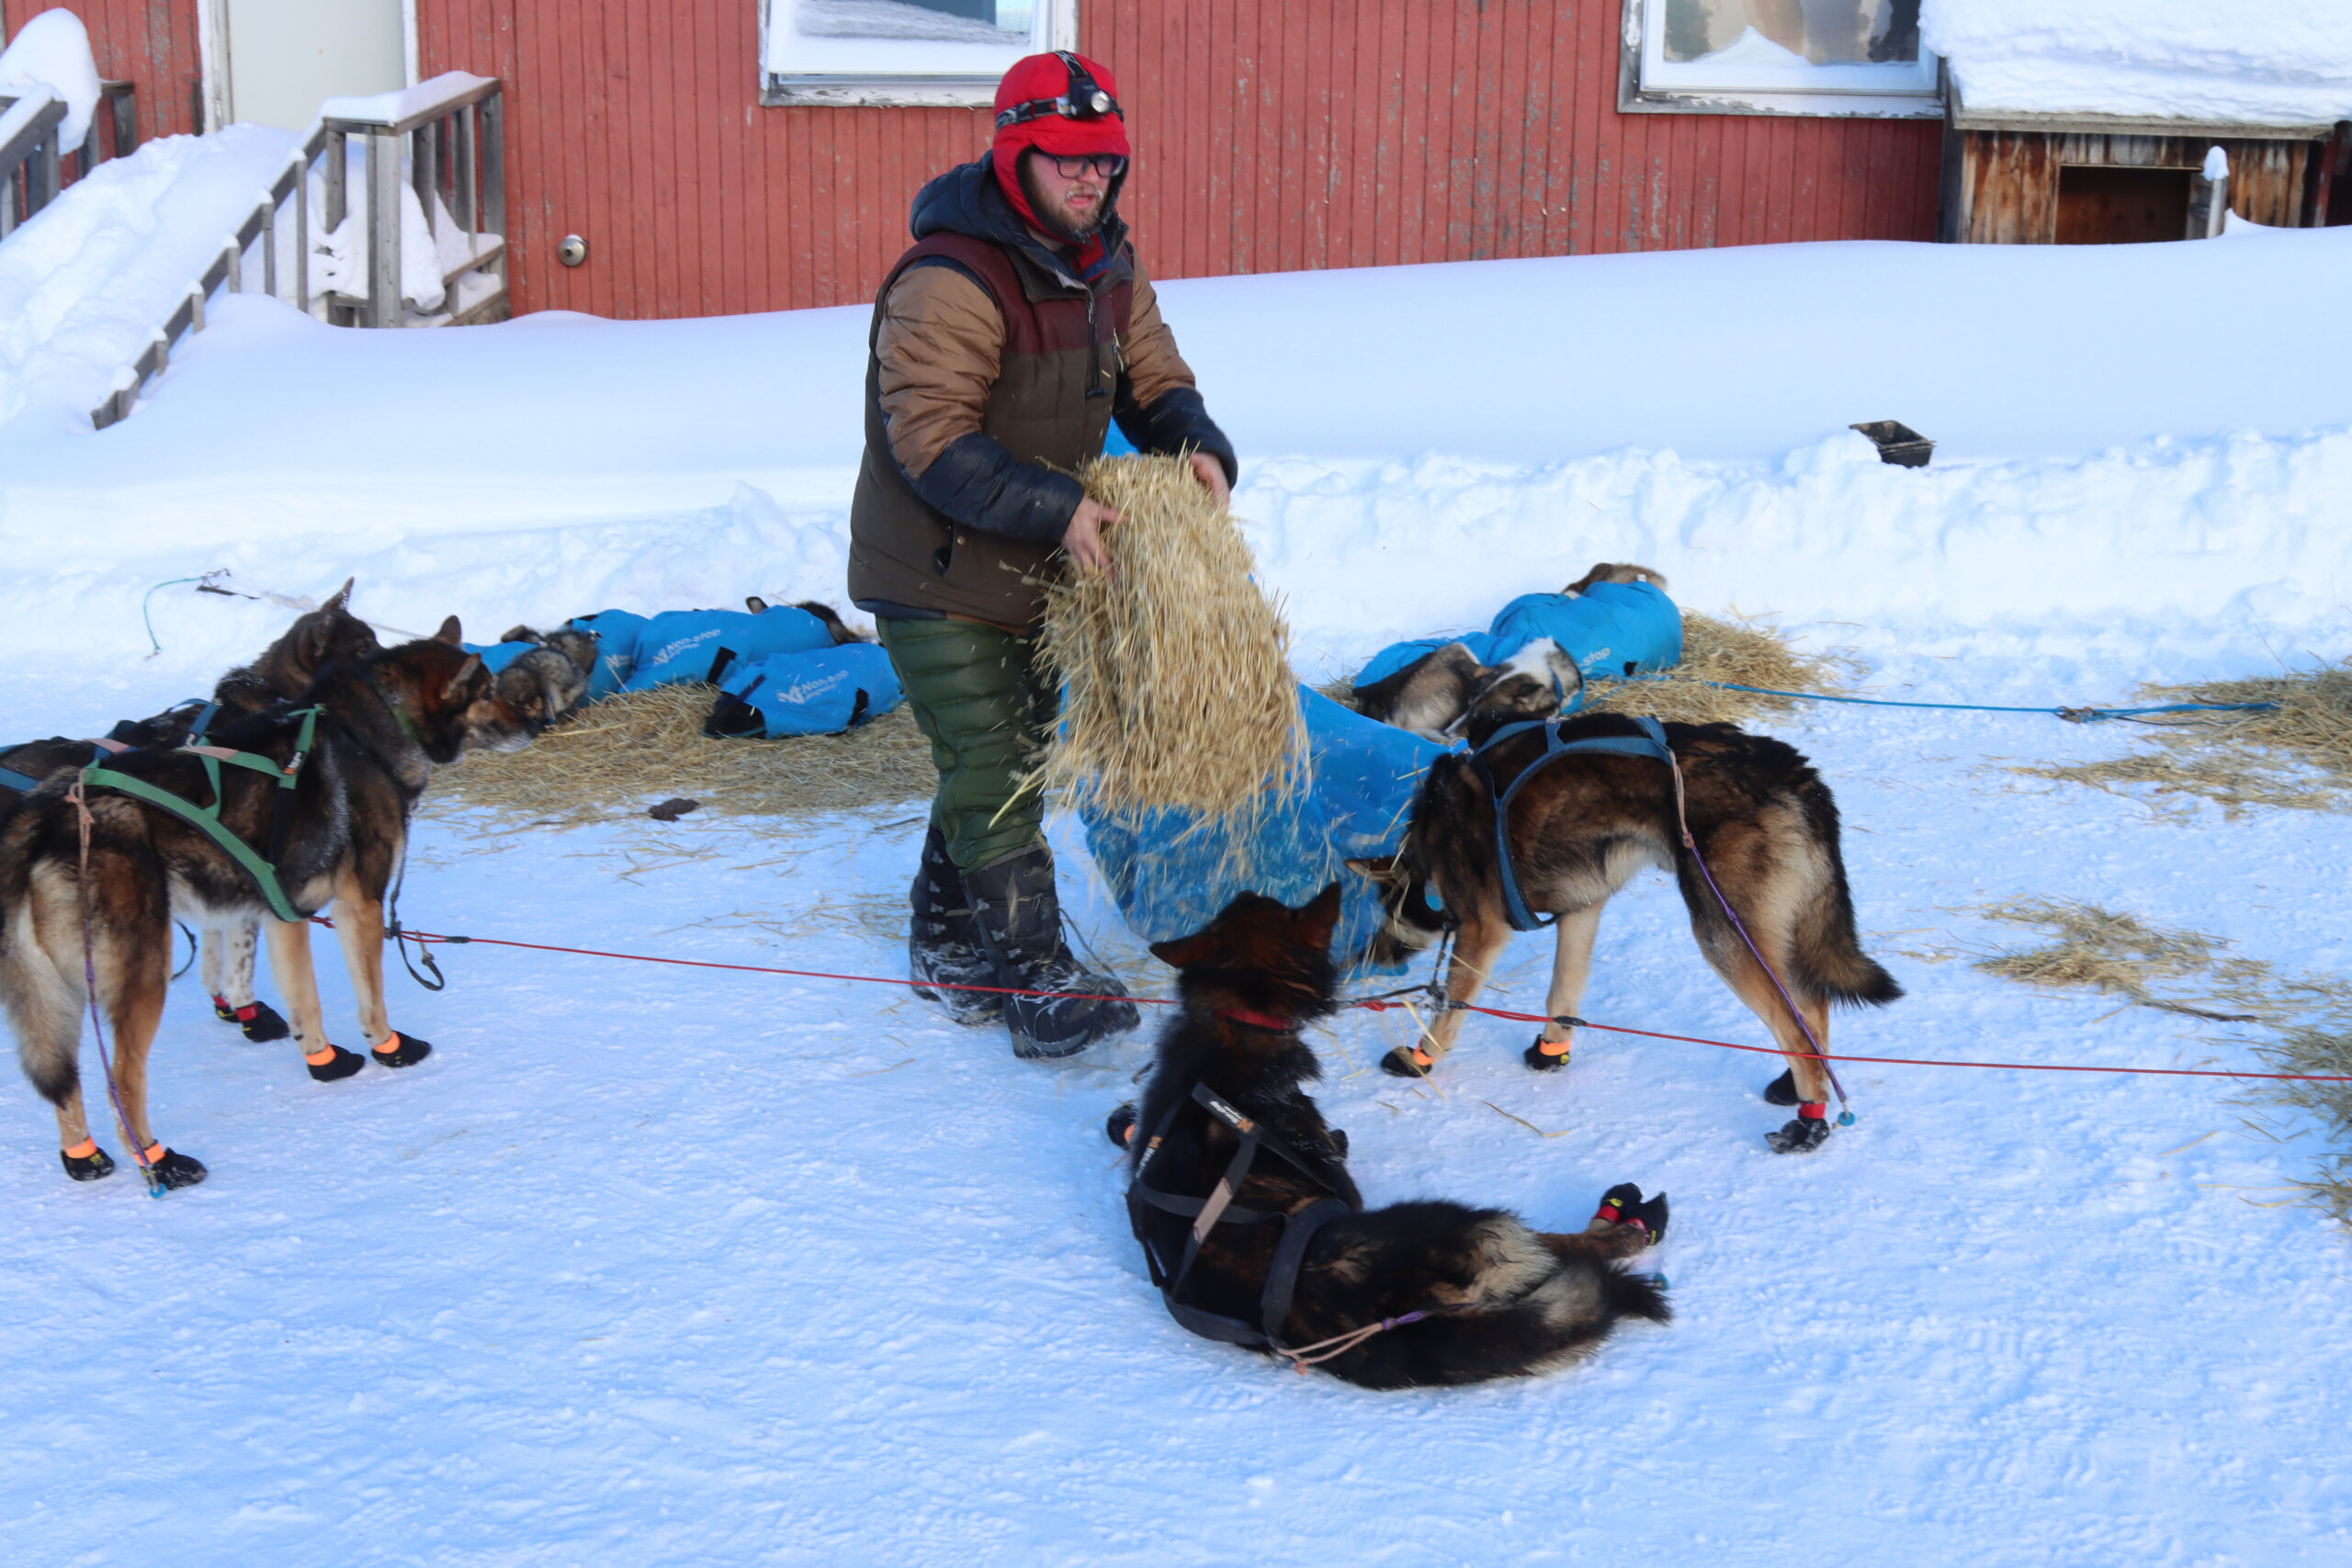 a musher puts out straw for their dogs